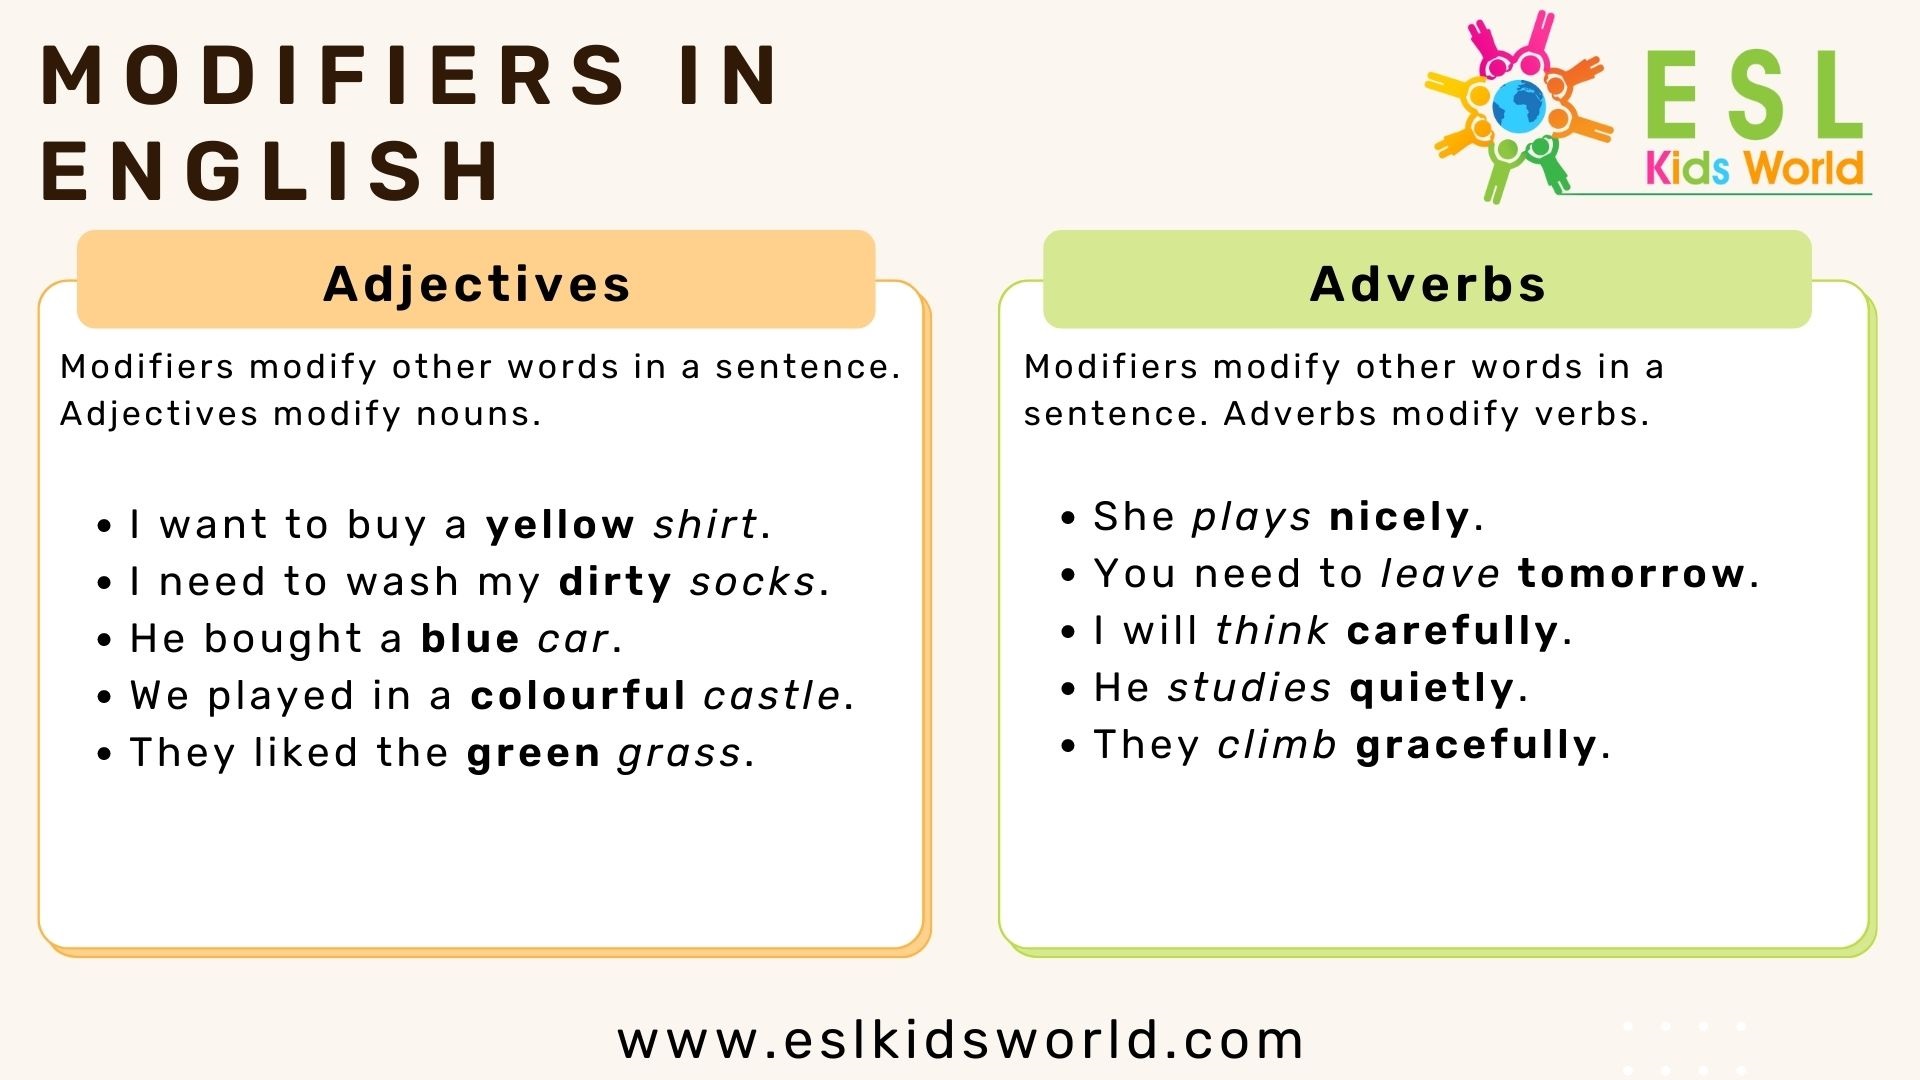 Modifier Examples | What World is Kids a Modifier? | ESL